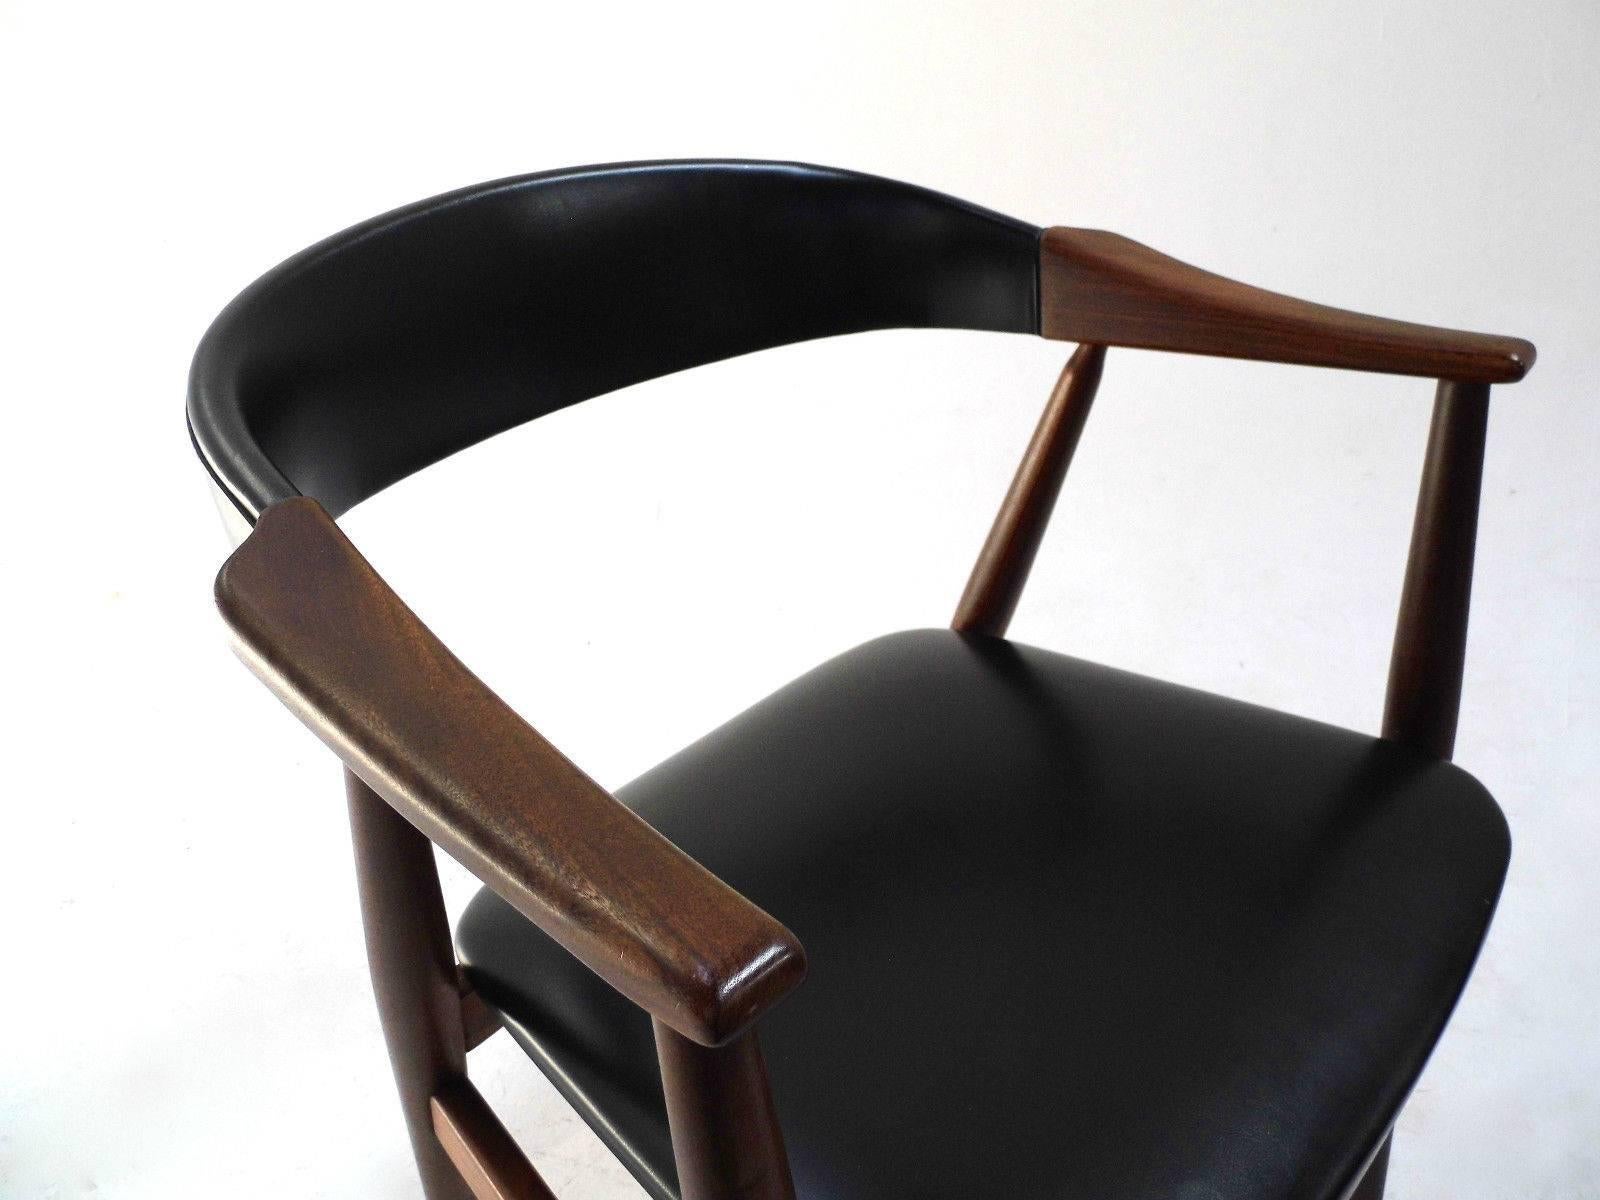 A beautiful teak and soft black vinyl desk chair by Farstrup, this would make a stylish addition to any living or work area. The chair has a curved backrest and wide seatpad for enhanced comfort. A striking piece of classically designed Danish